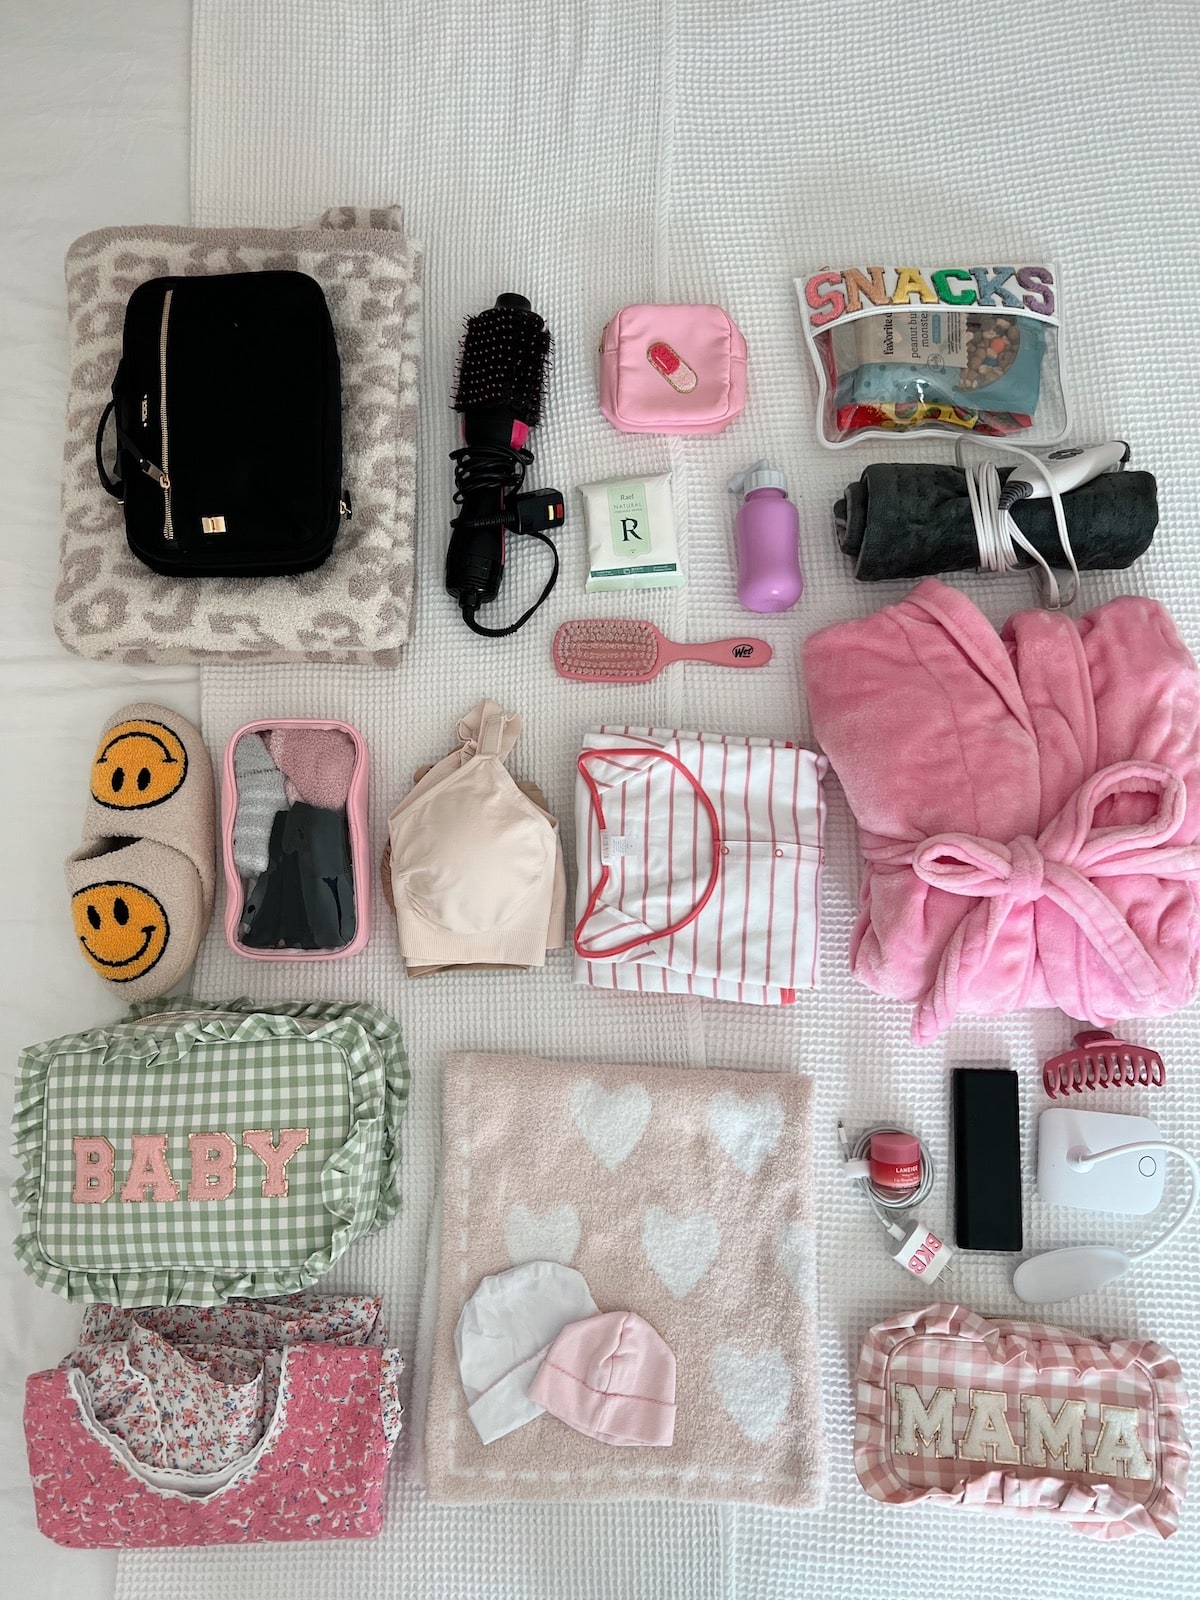  Mom and Baby Hospital Bag Essentials Set - Complete Postpartum  Care Kit with Toiletry Must-Haves, Postpartum Essentials, Baby Essentials,  and New Mom Gifts for Labor, Delivery, and Beyond : Baby